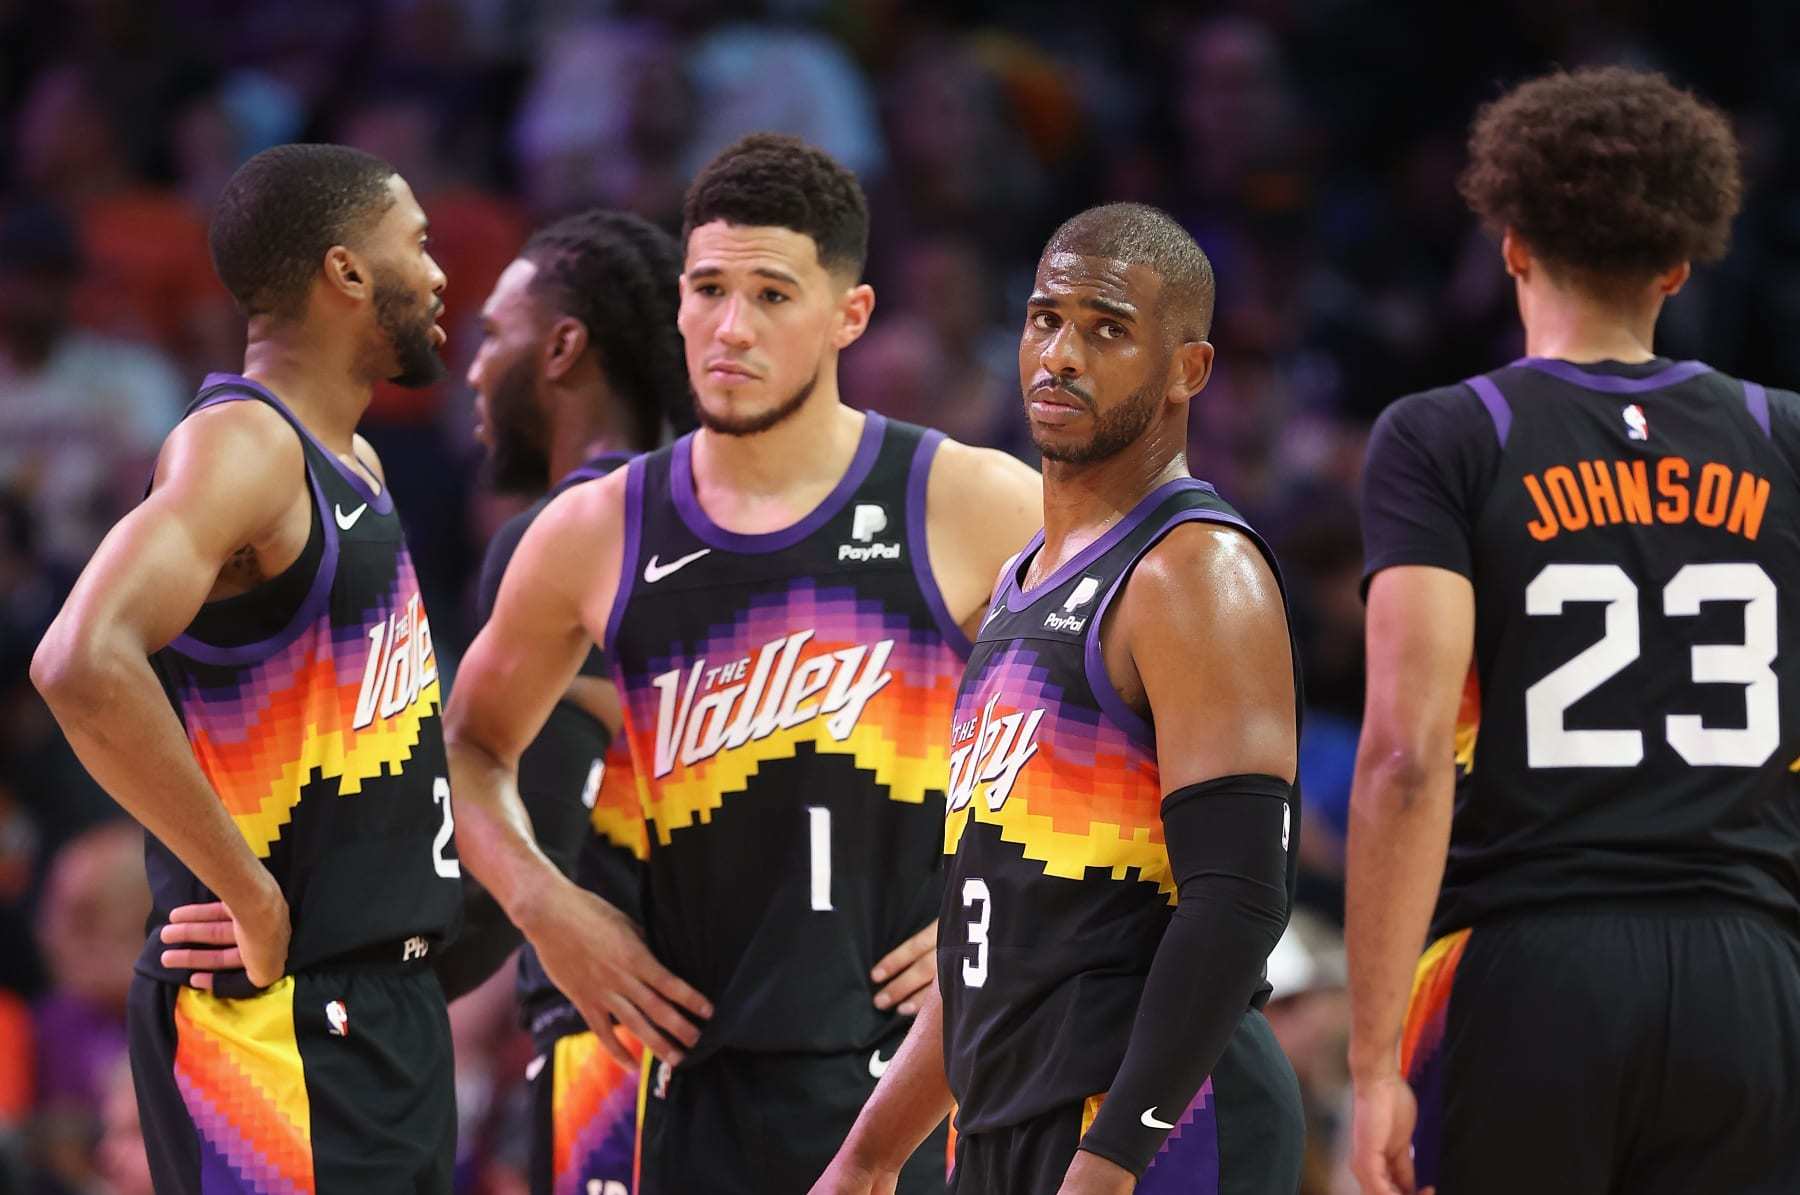 Phoenix Suns 2023-24 Jerseys Leaked? Rejected By New Owners?